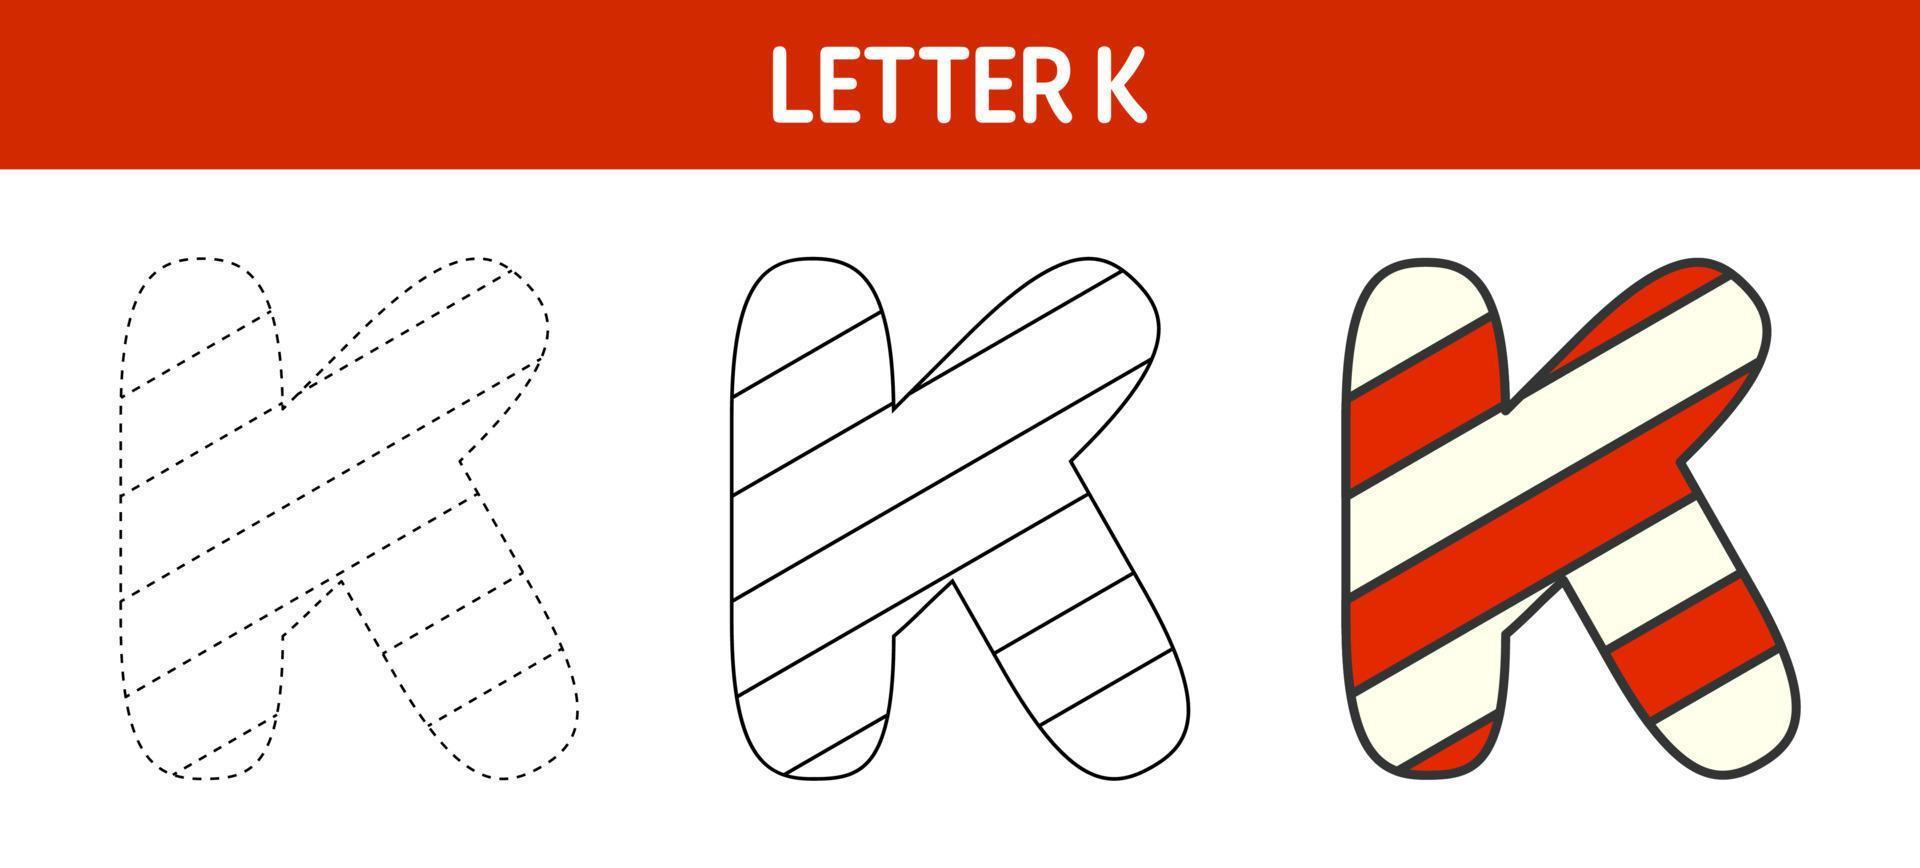 Letter K Candy Cane, tracing and coloring worksheet for kids vector